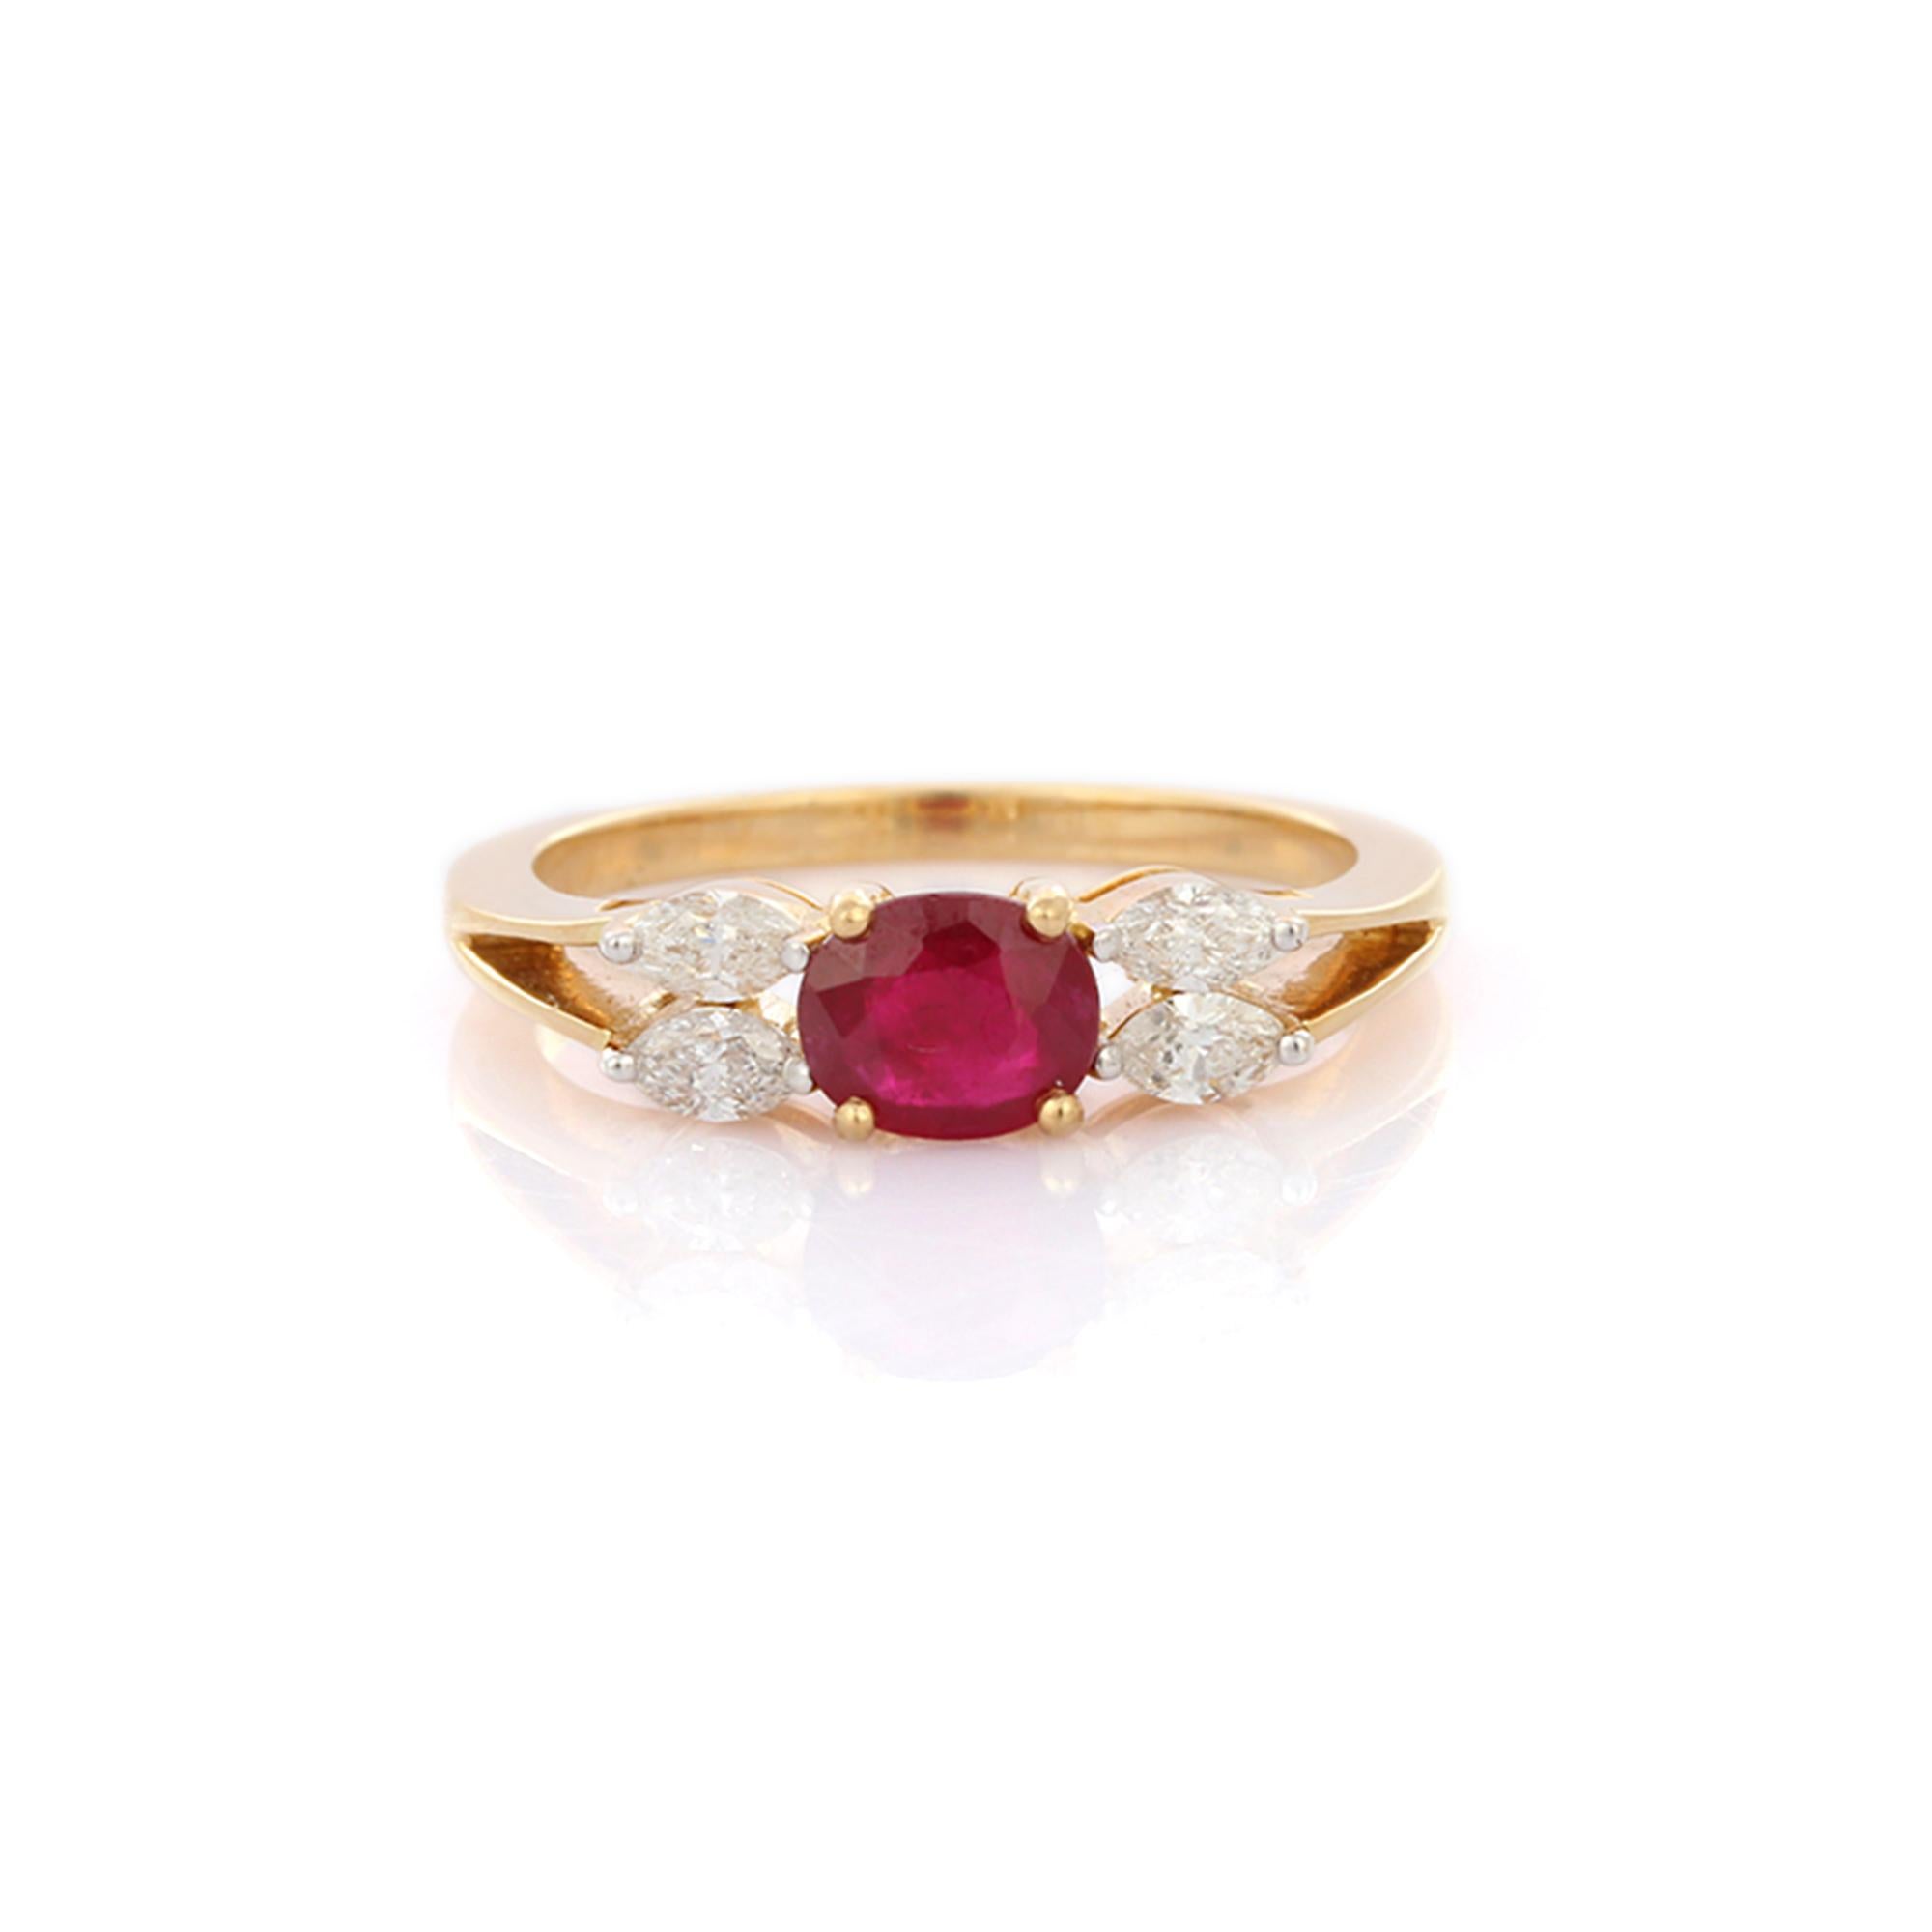 For Sale:  Astonishing Oval Cut Ruby Gemstone and Diamond Ring in 18K Solid Yellow Gold  5